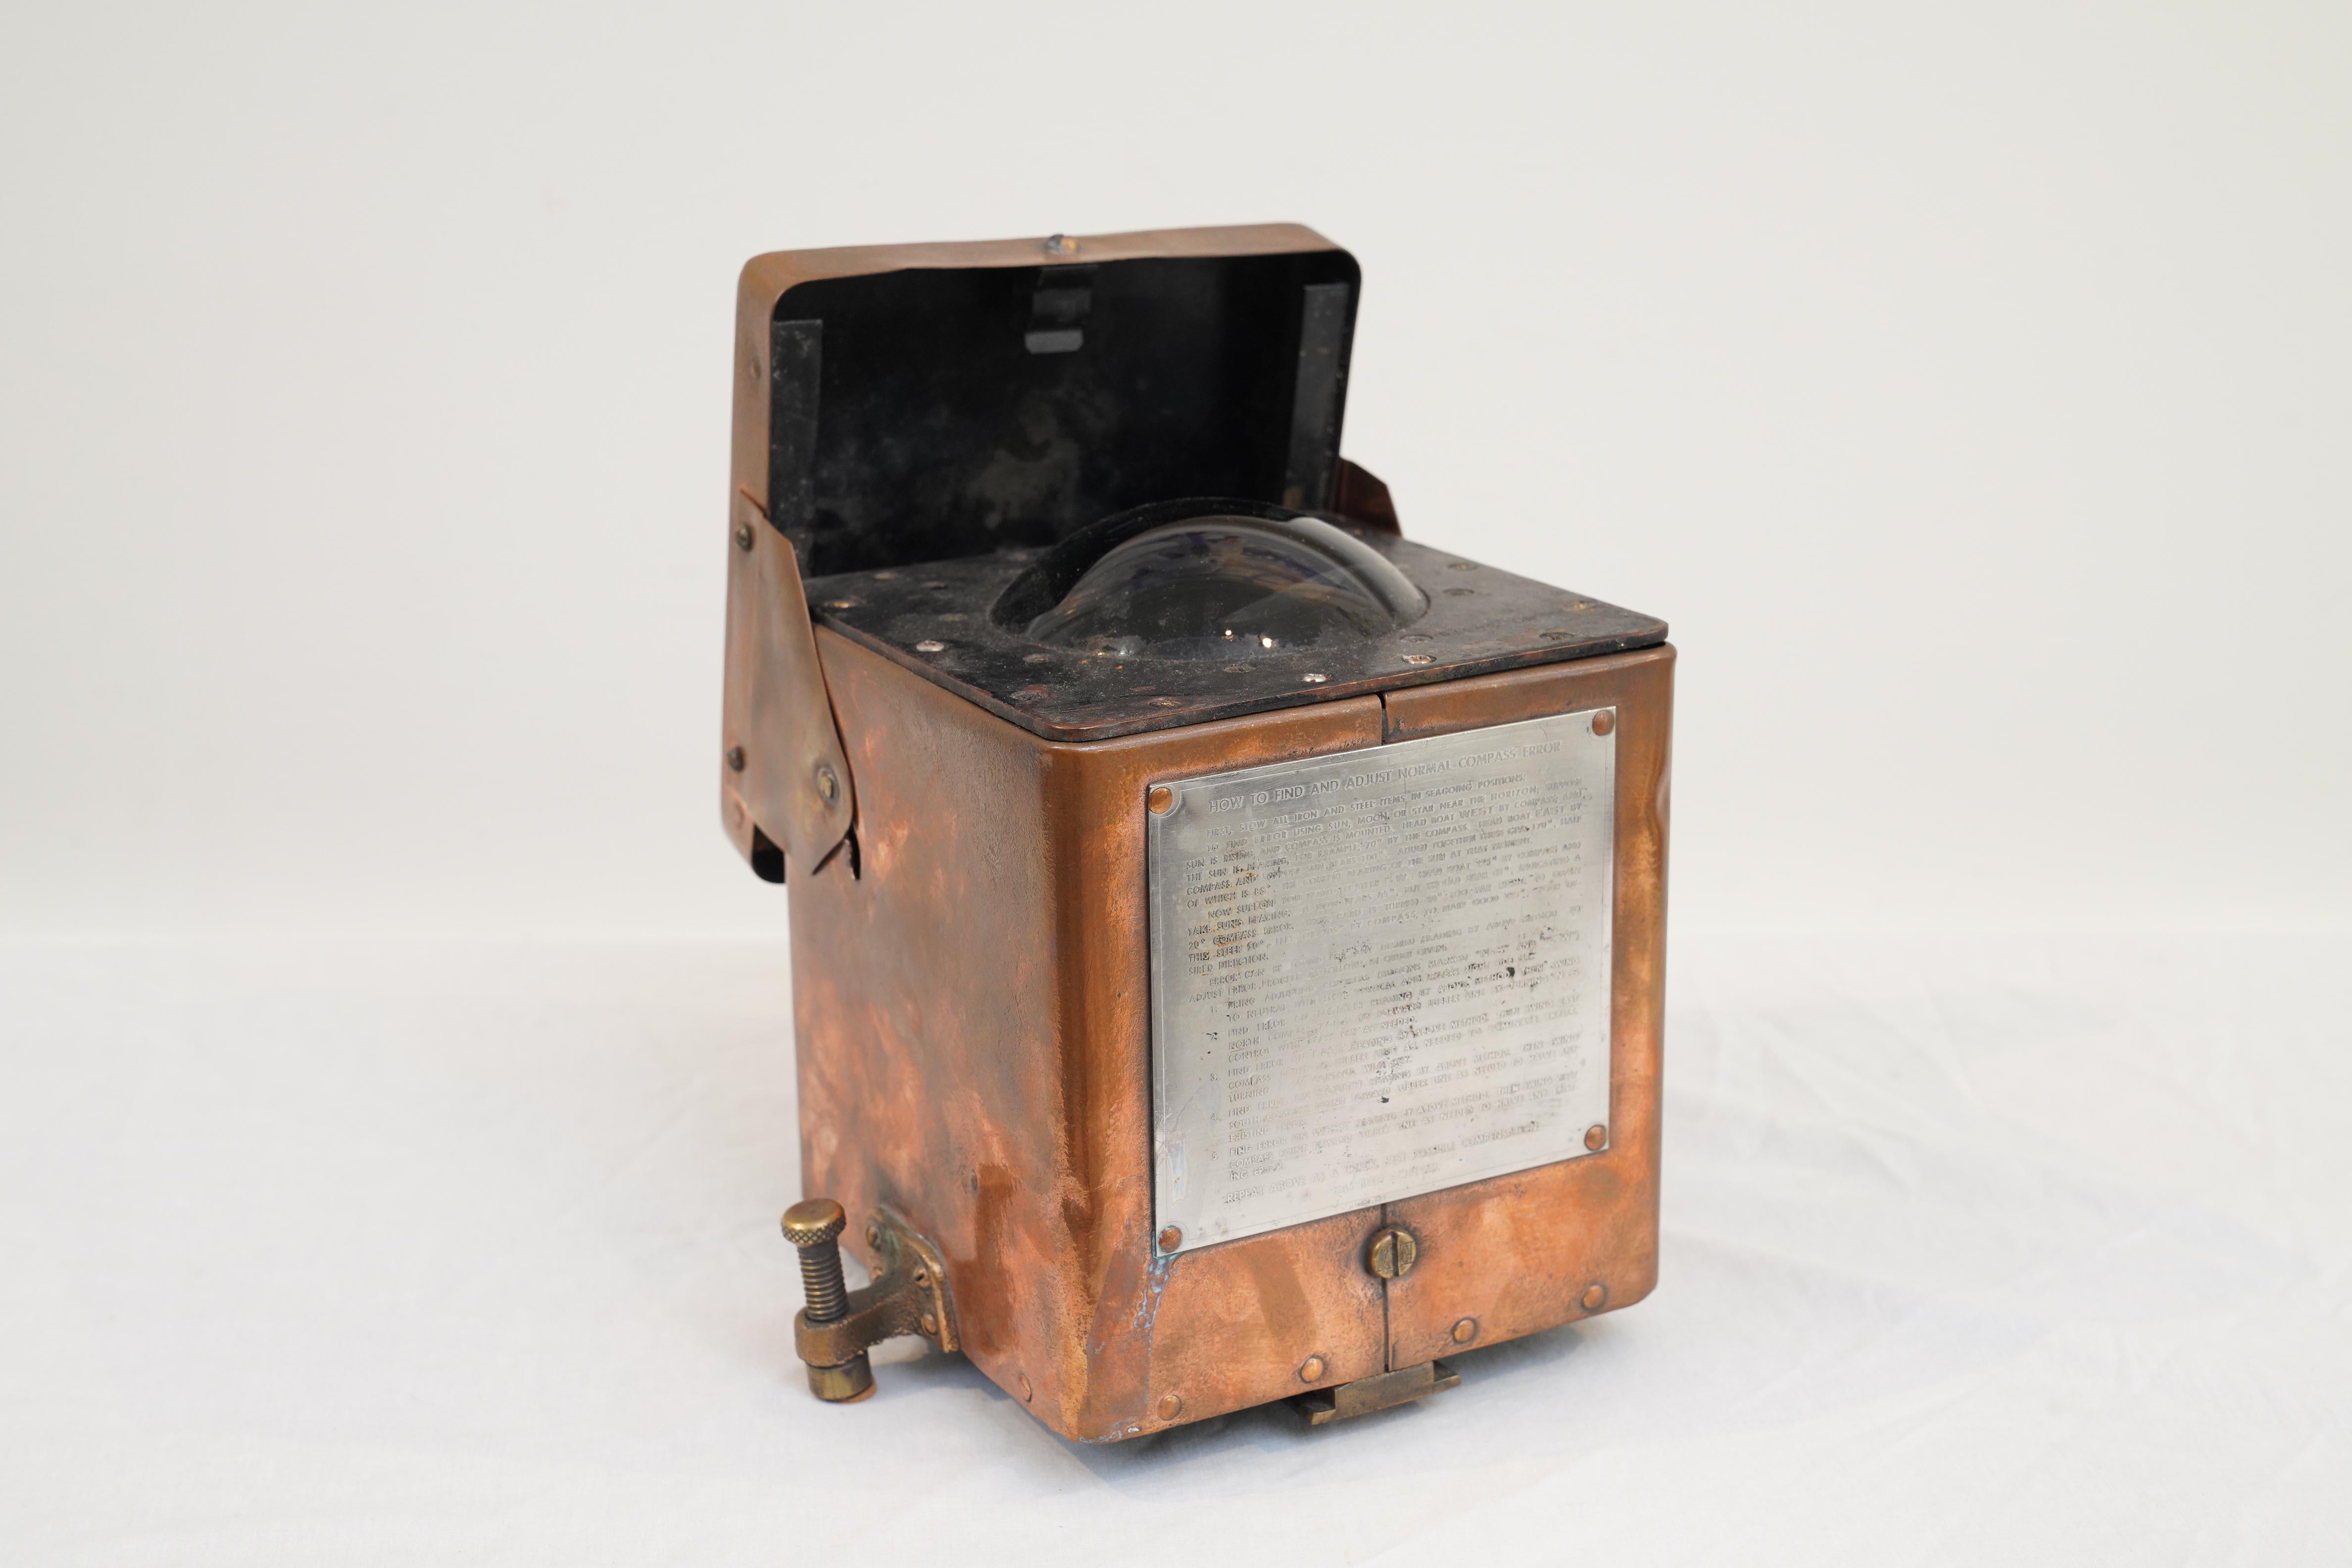 An American, copper, liquid compass from a ship's lifeboat. It has a snap-shut lid to protect it from the elements and the original brass bolts that held into place. The compass sits under a glass dome and is in perfect working order. The steel face